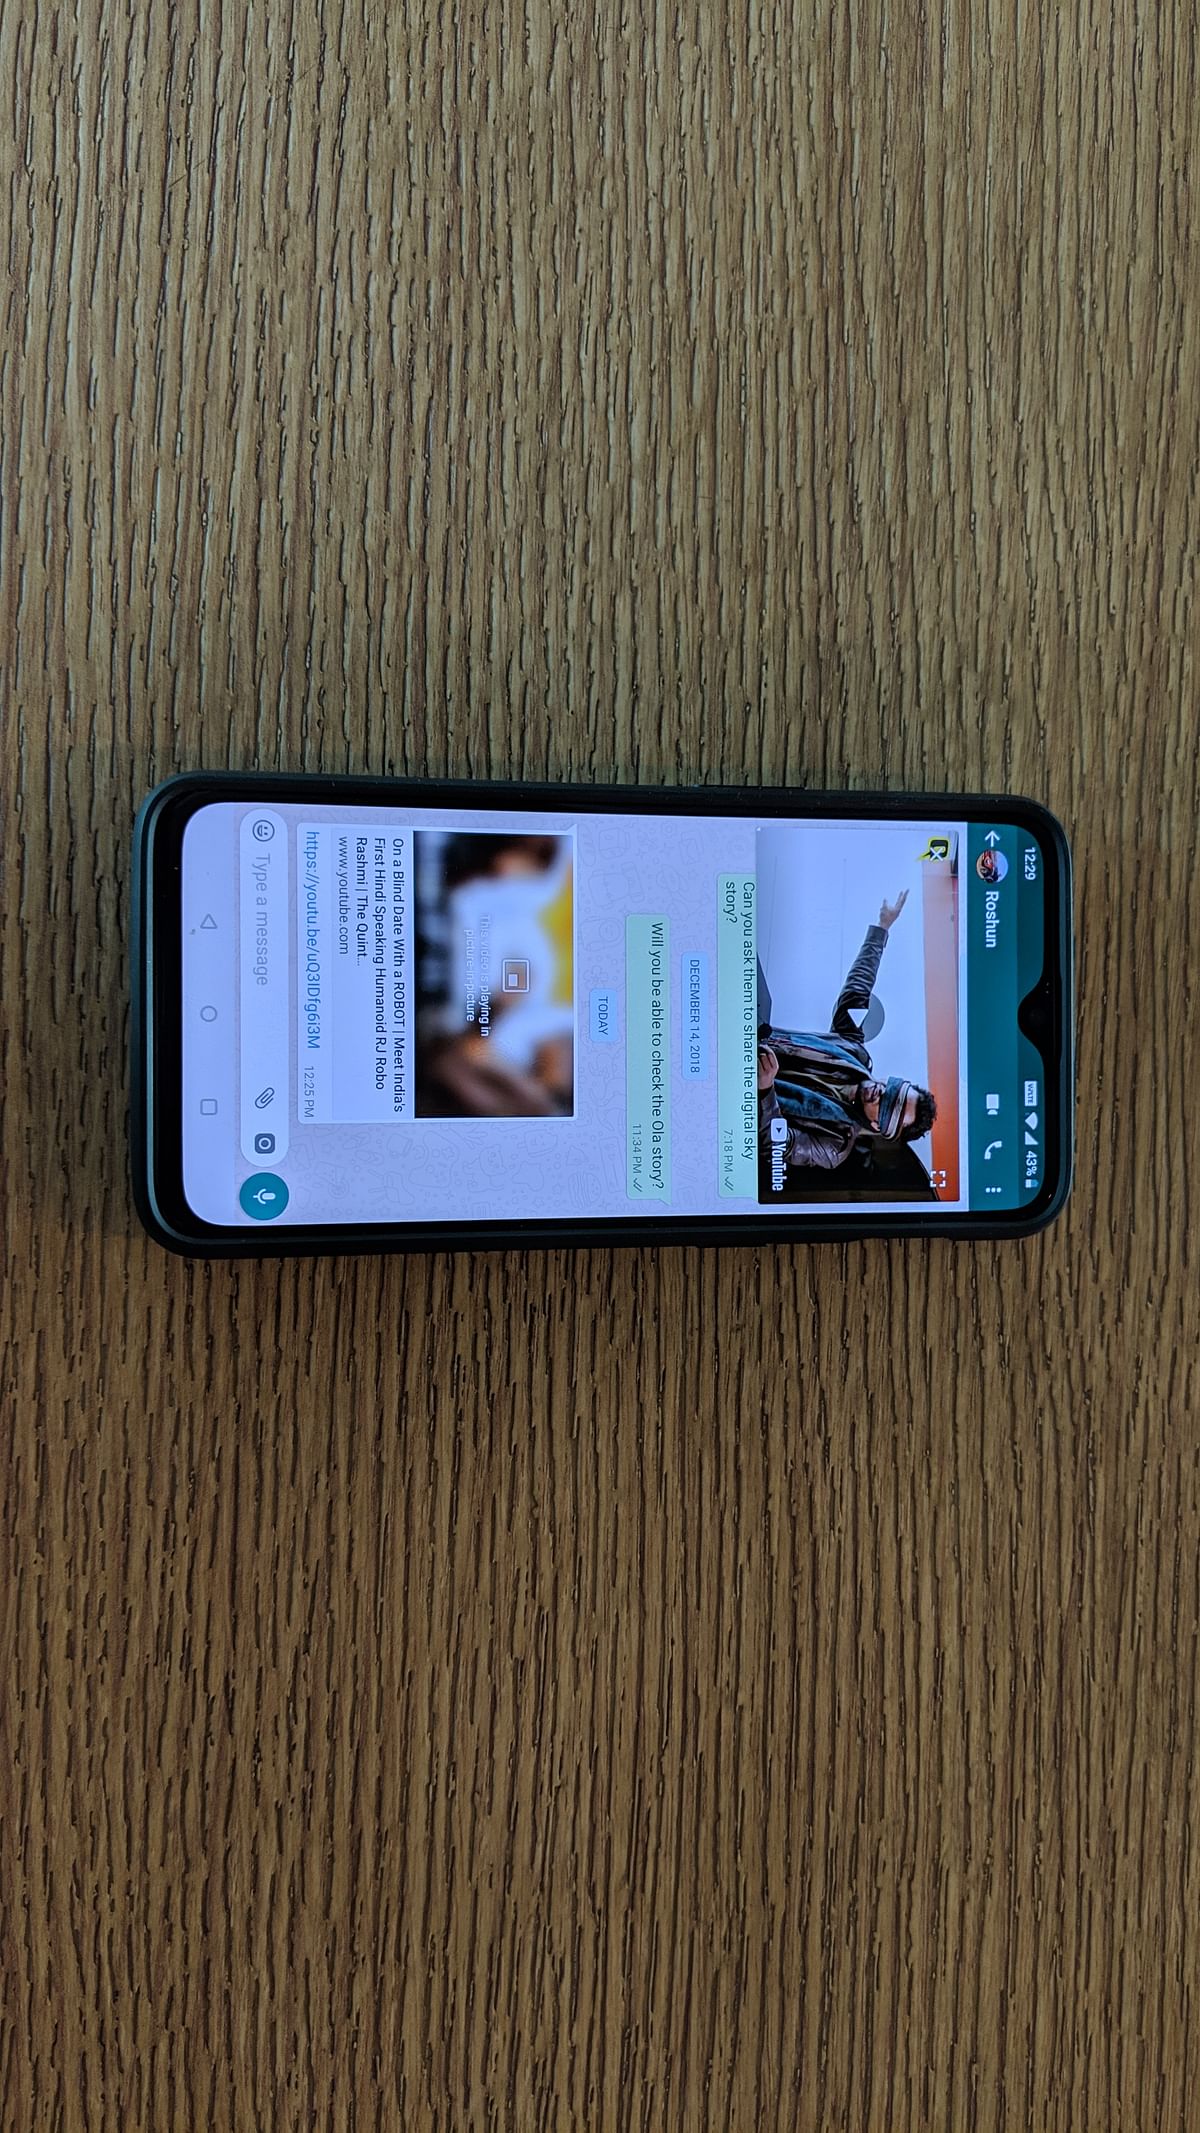 WhatsApp picture-in-picture mode for watching videos now available for Android users.